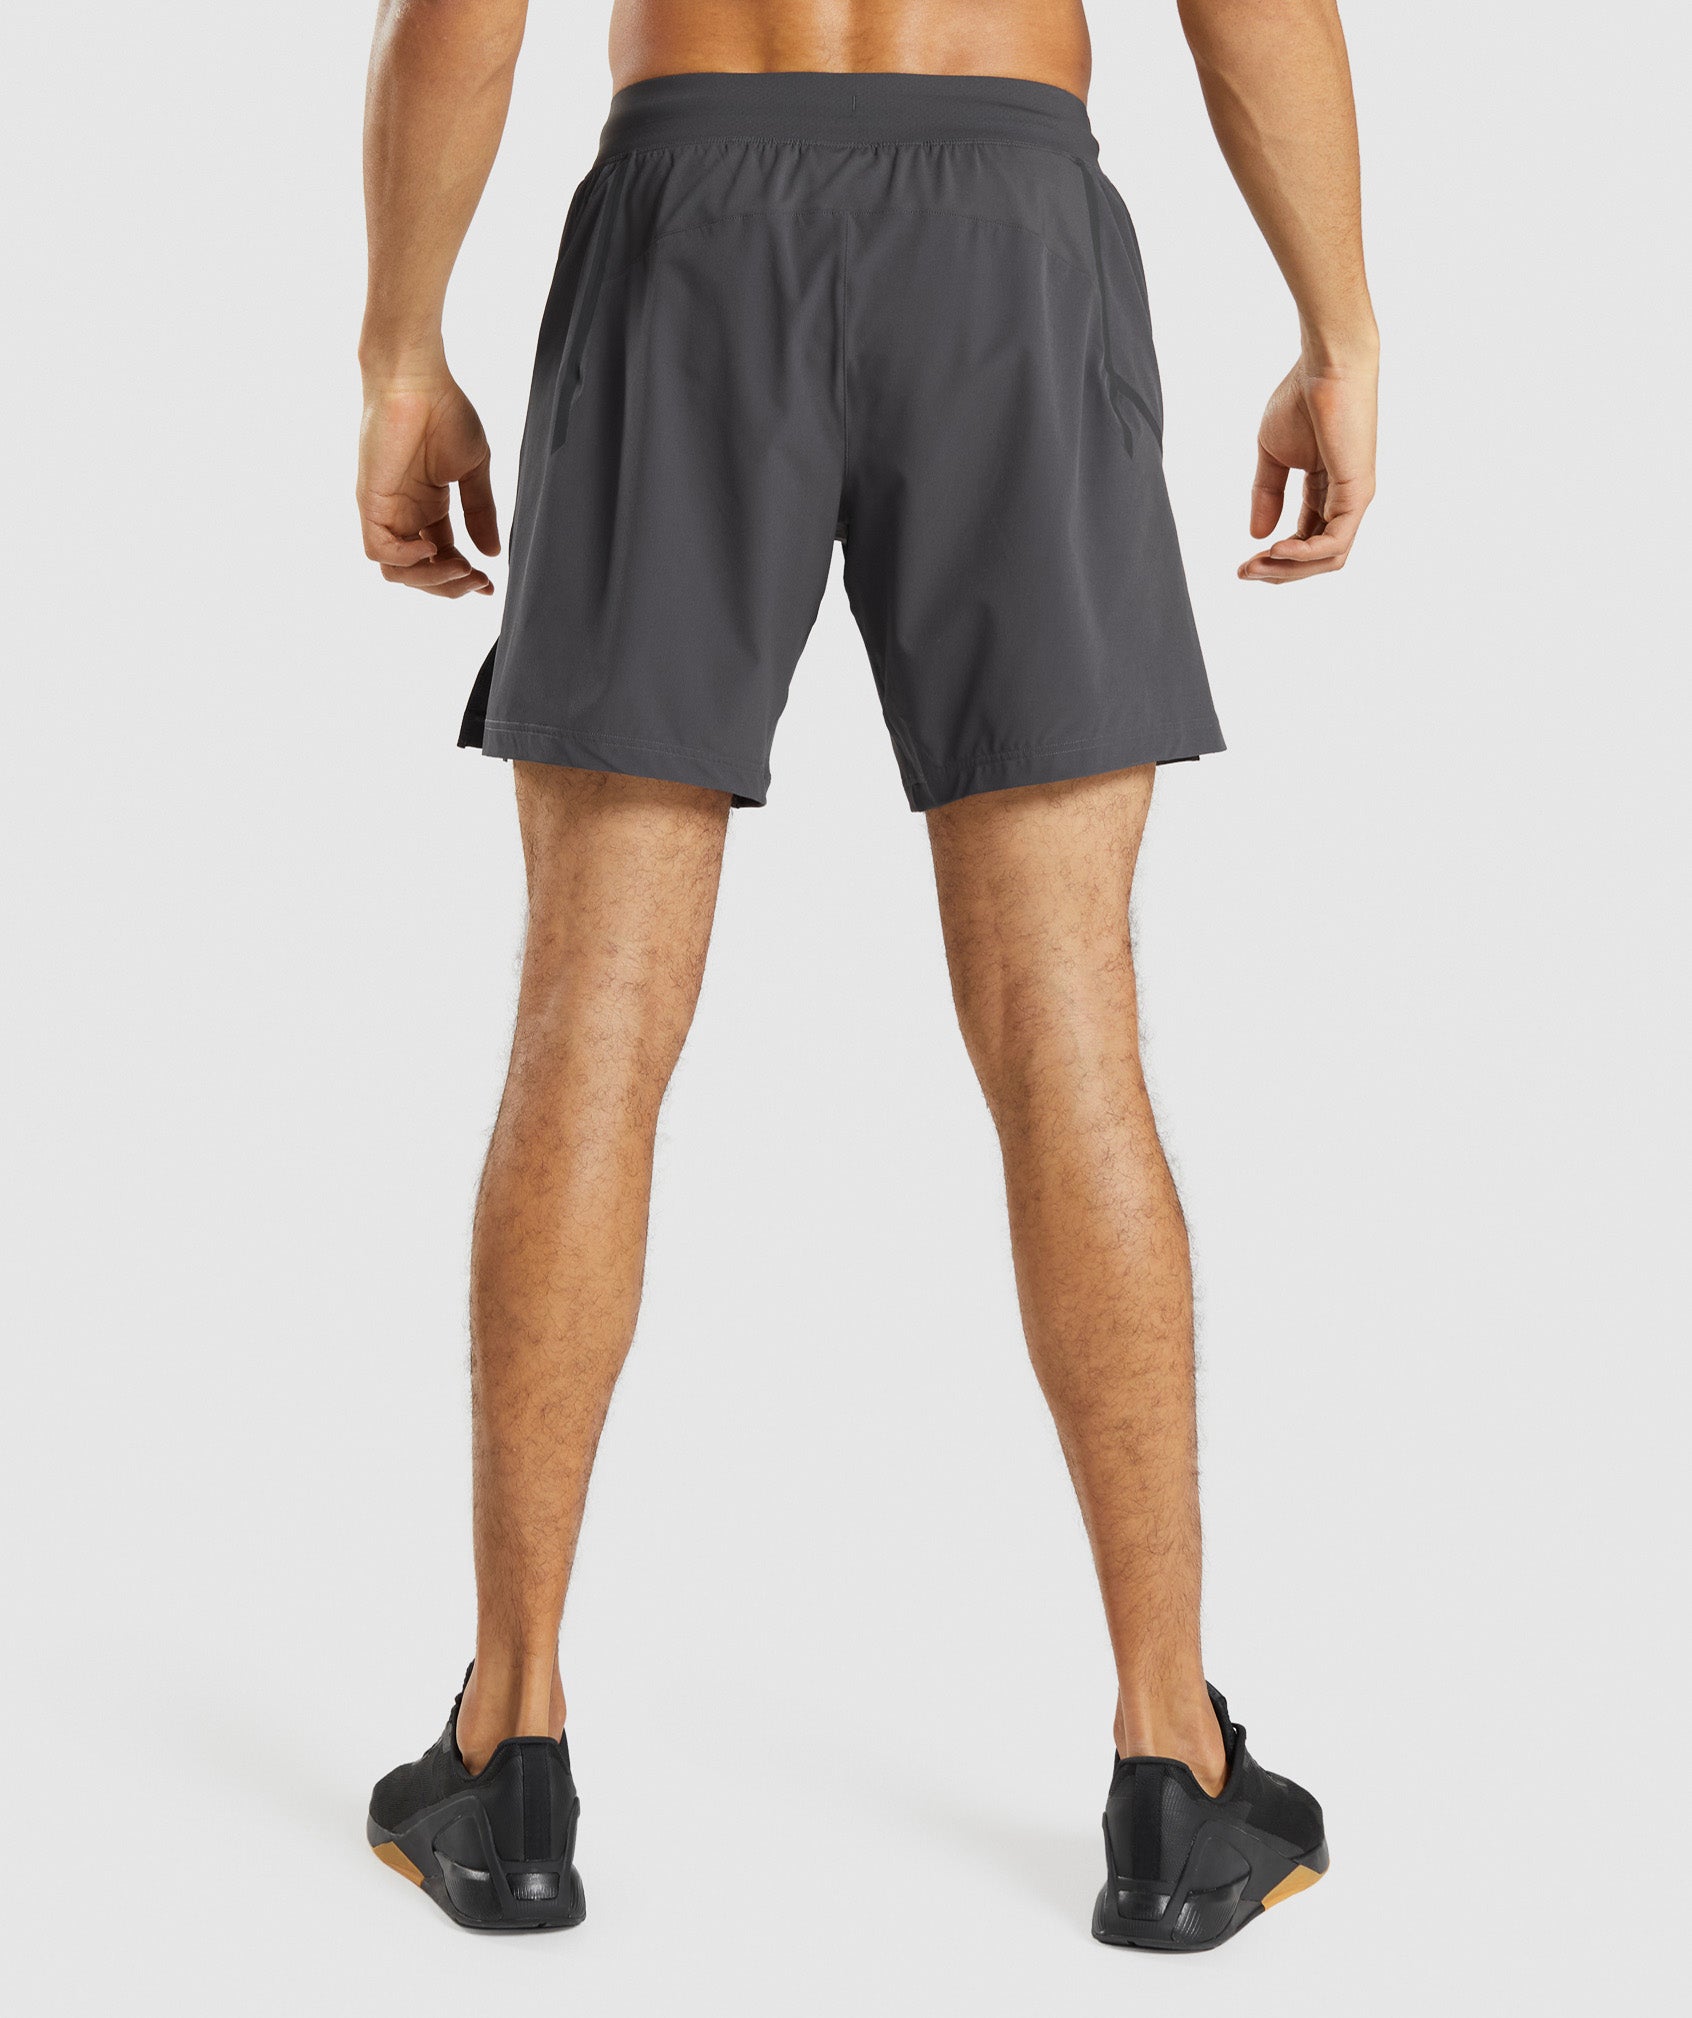 Apex 8" Function Shorts in Onyx Grey - view 3